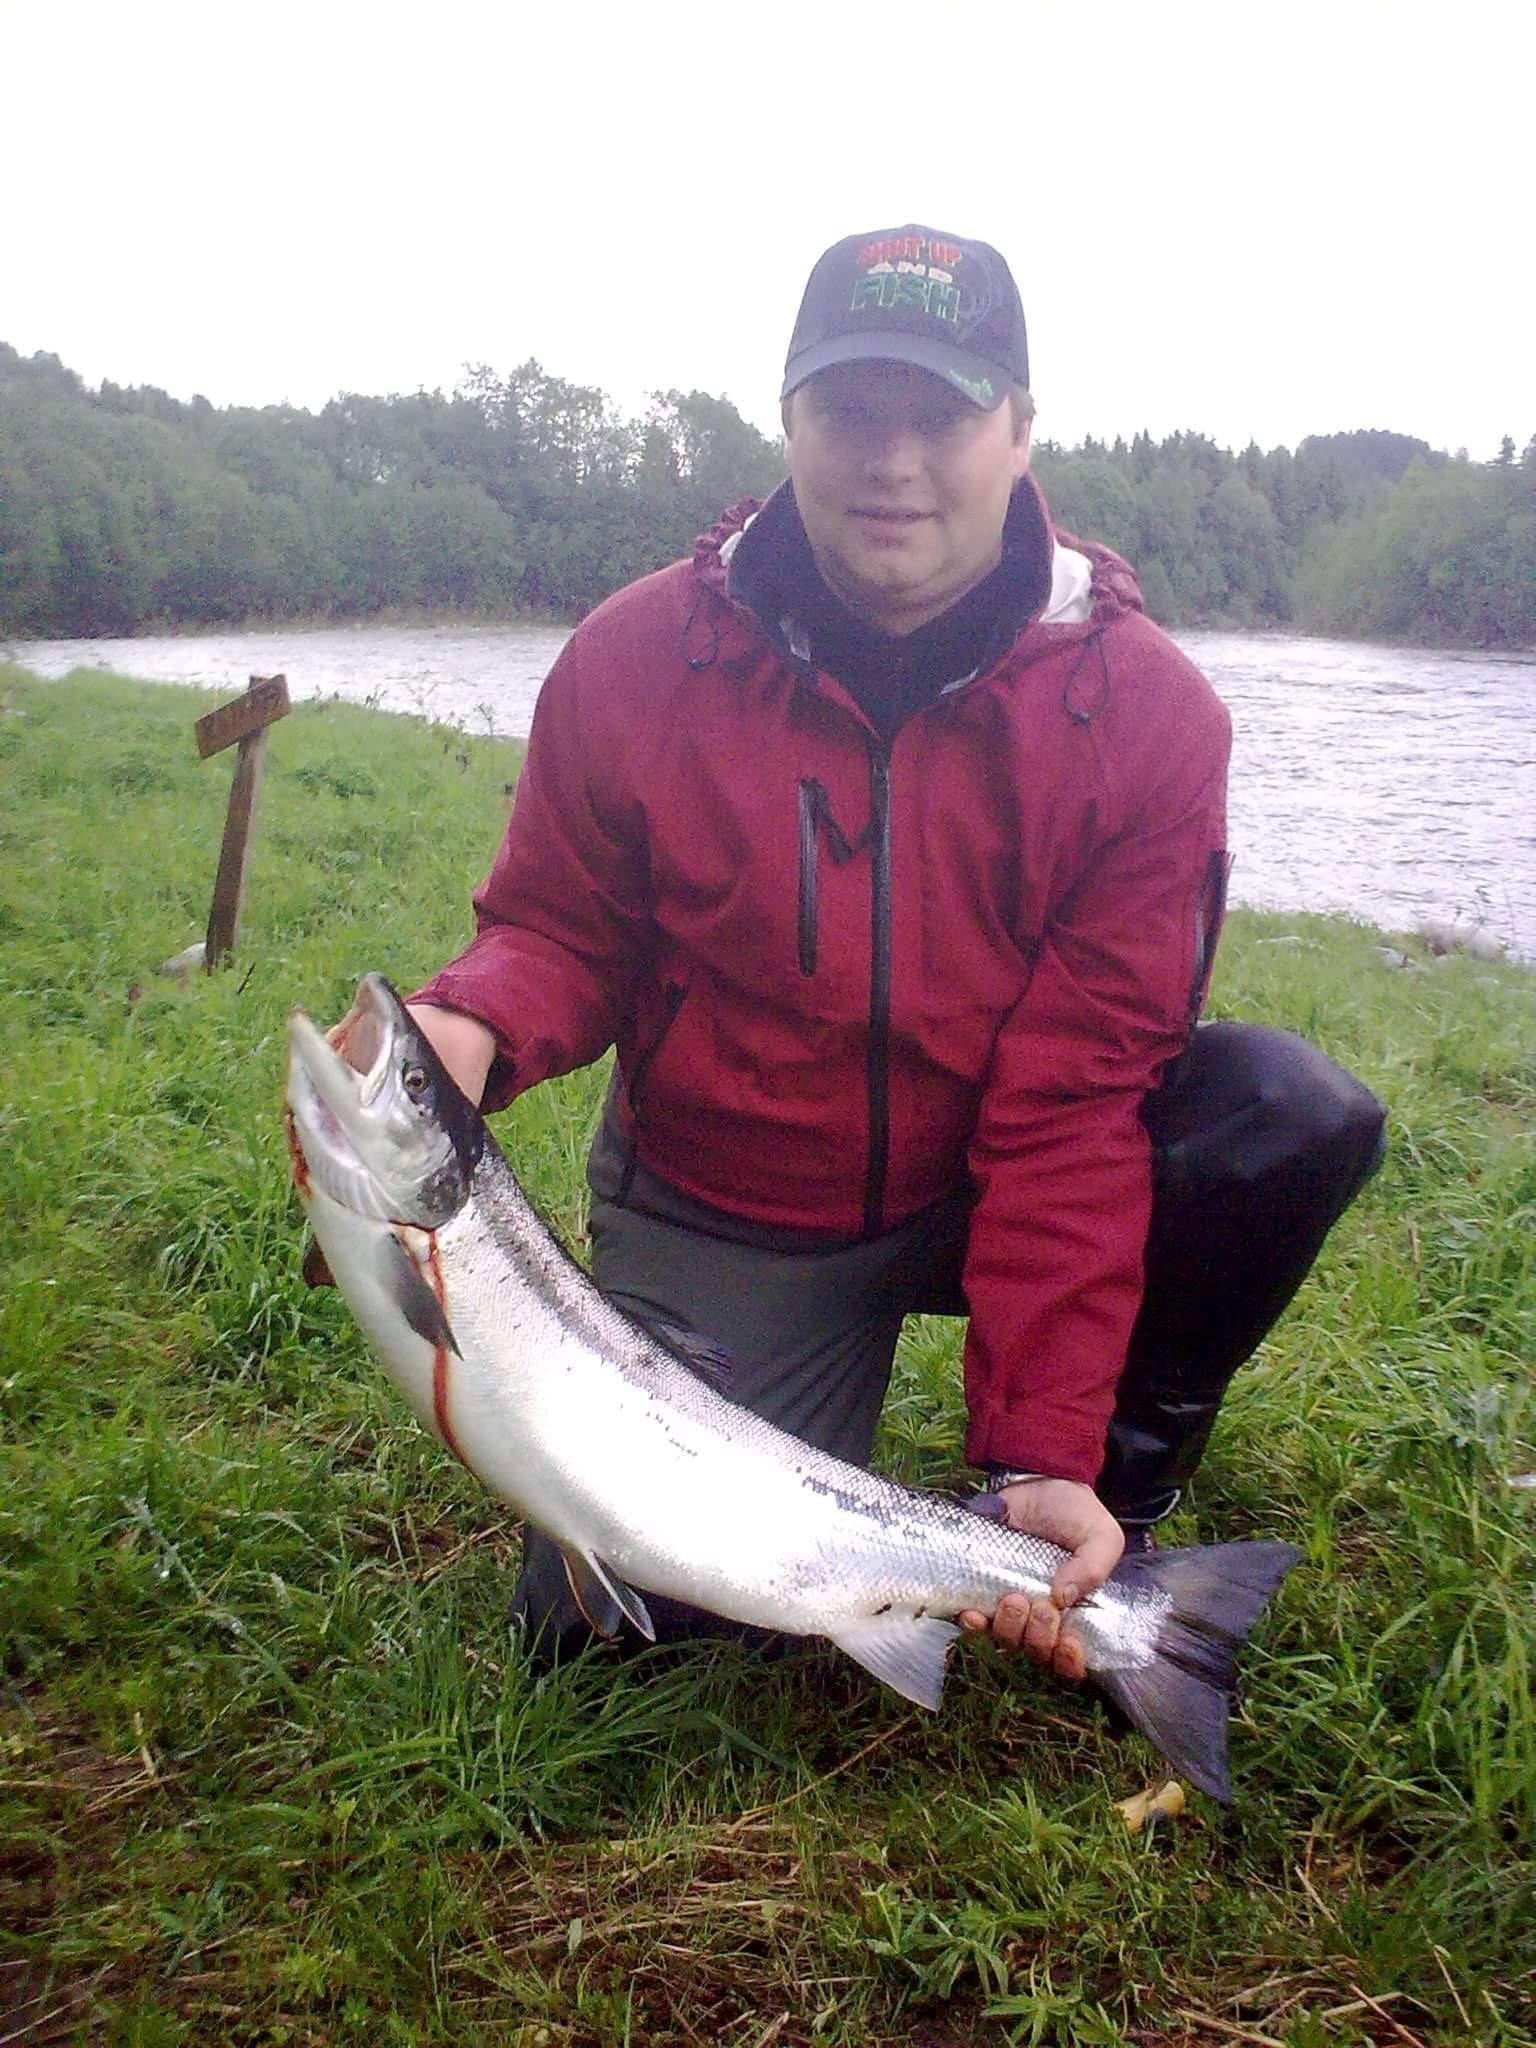 Buy fishing license and explore salmon fishing in River Orkla